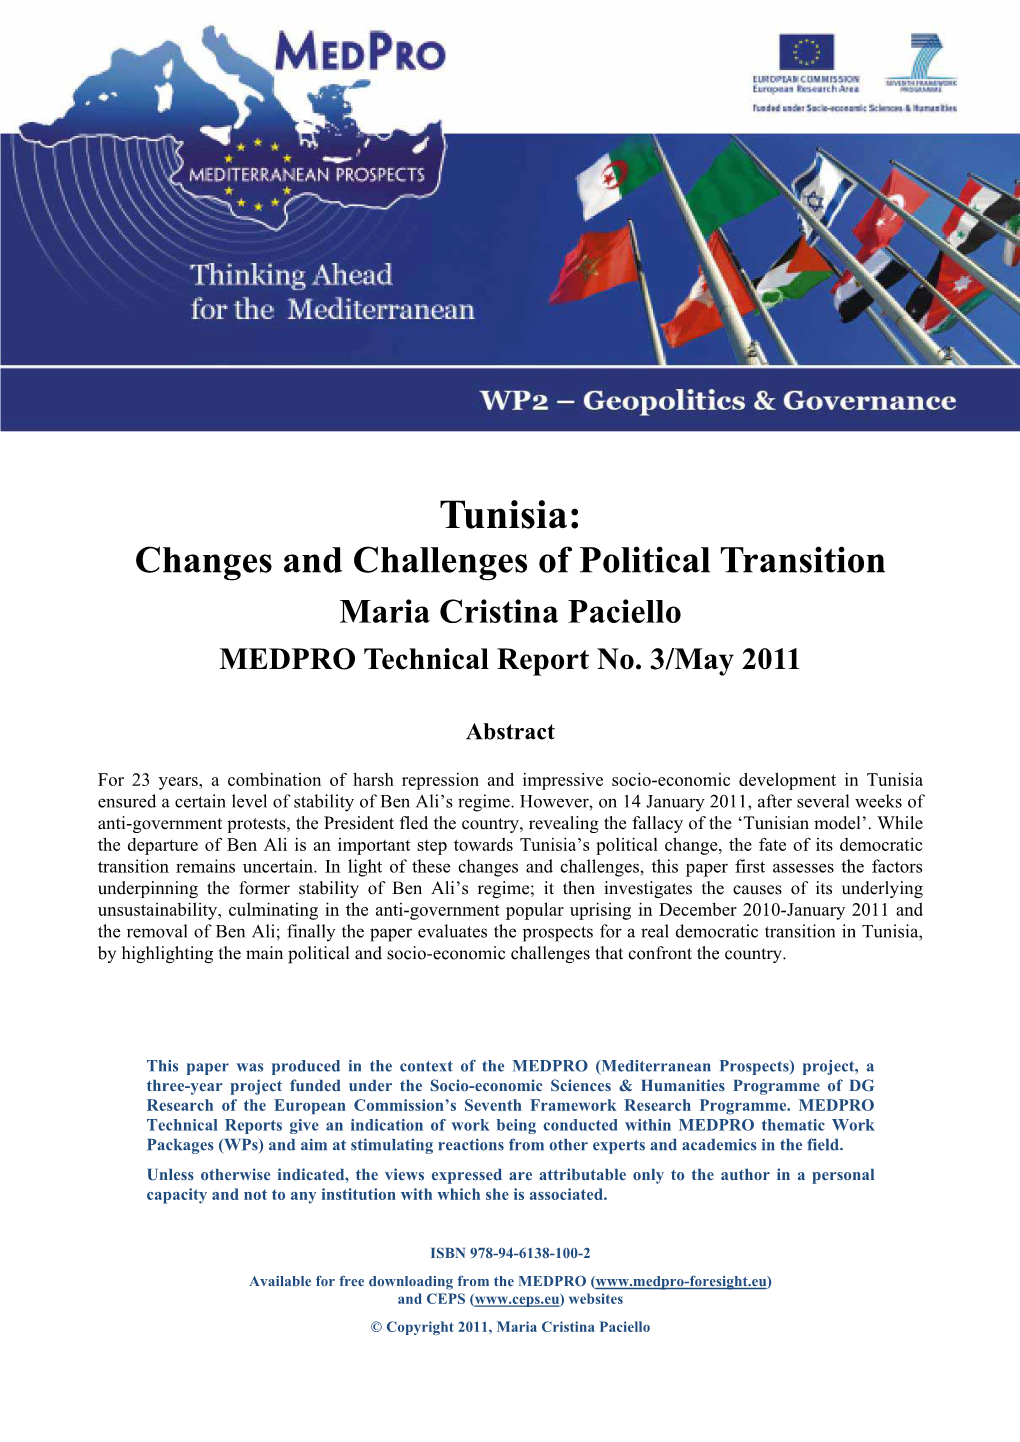 Tunisia: Changes and Challenges of Political Transition Maria Cristina Paciello MEDPRO Technical Report No